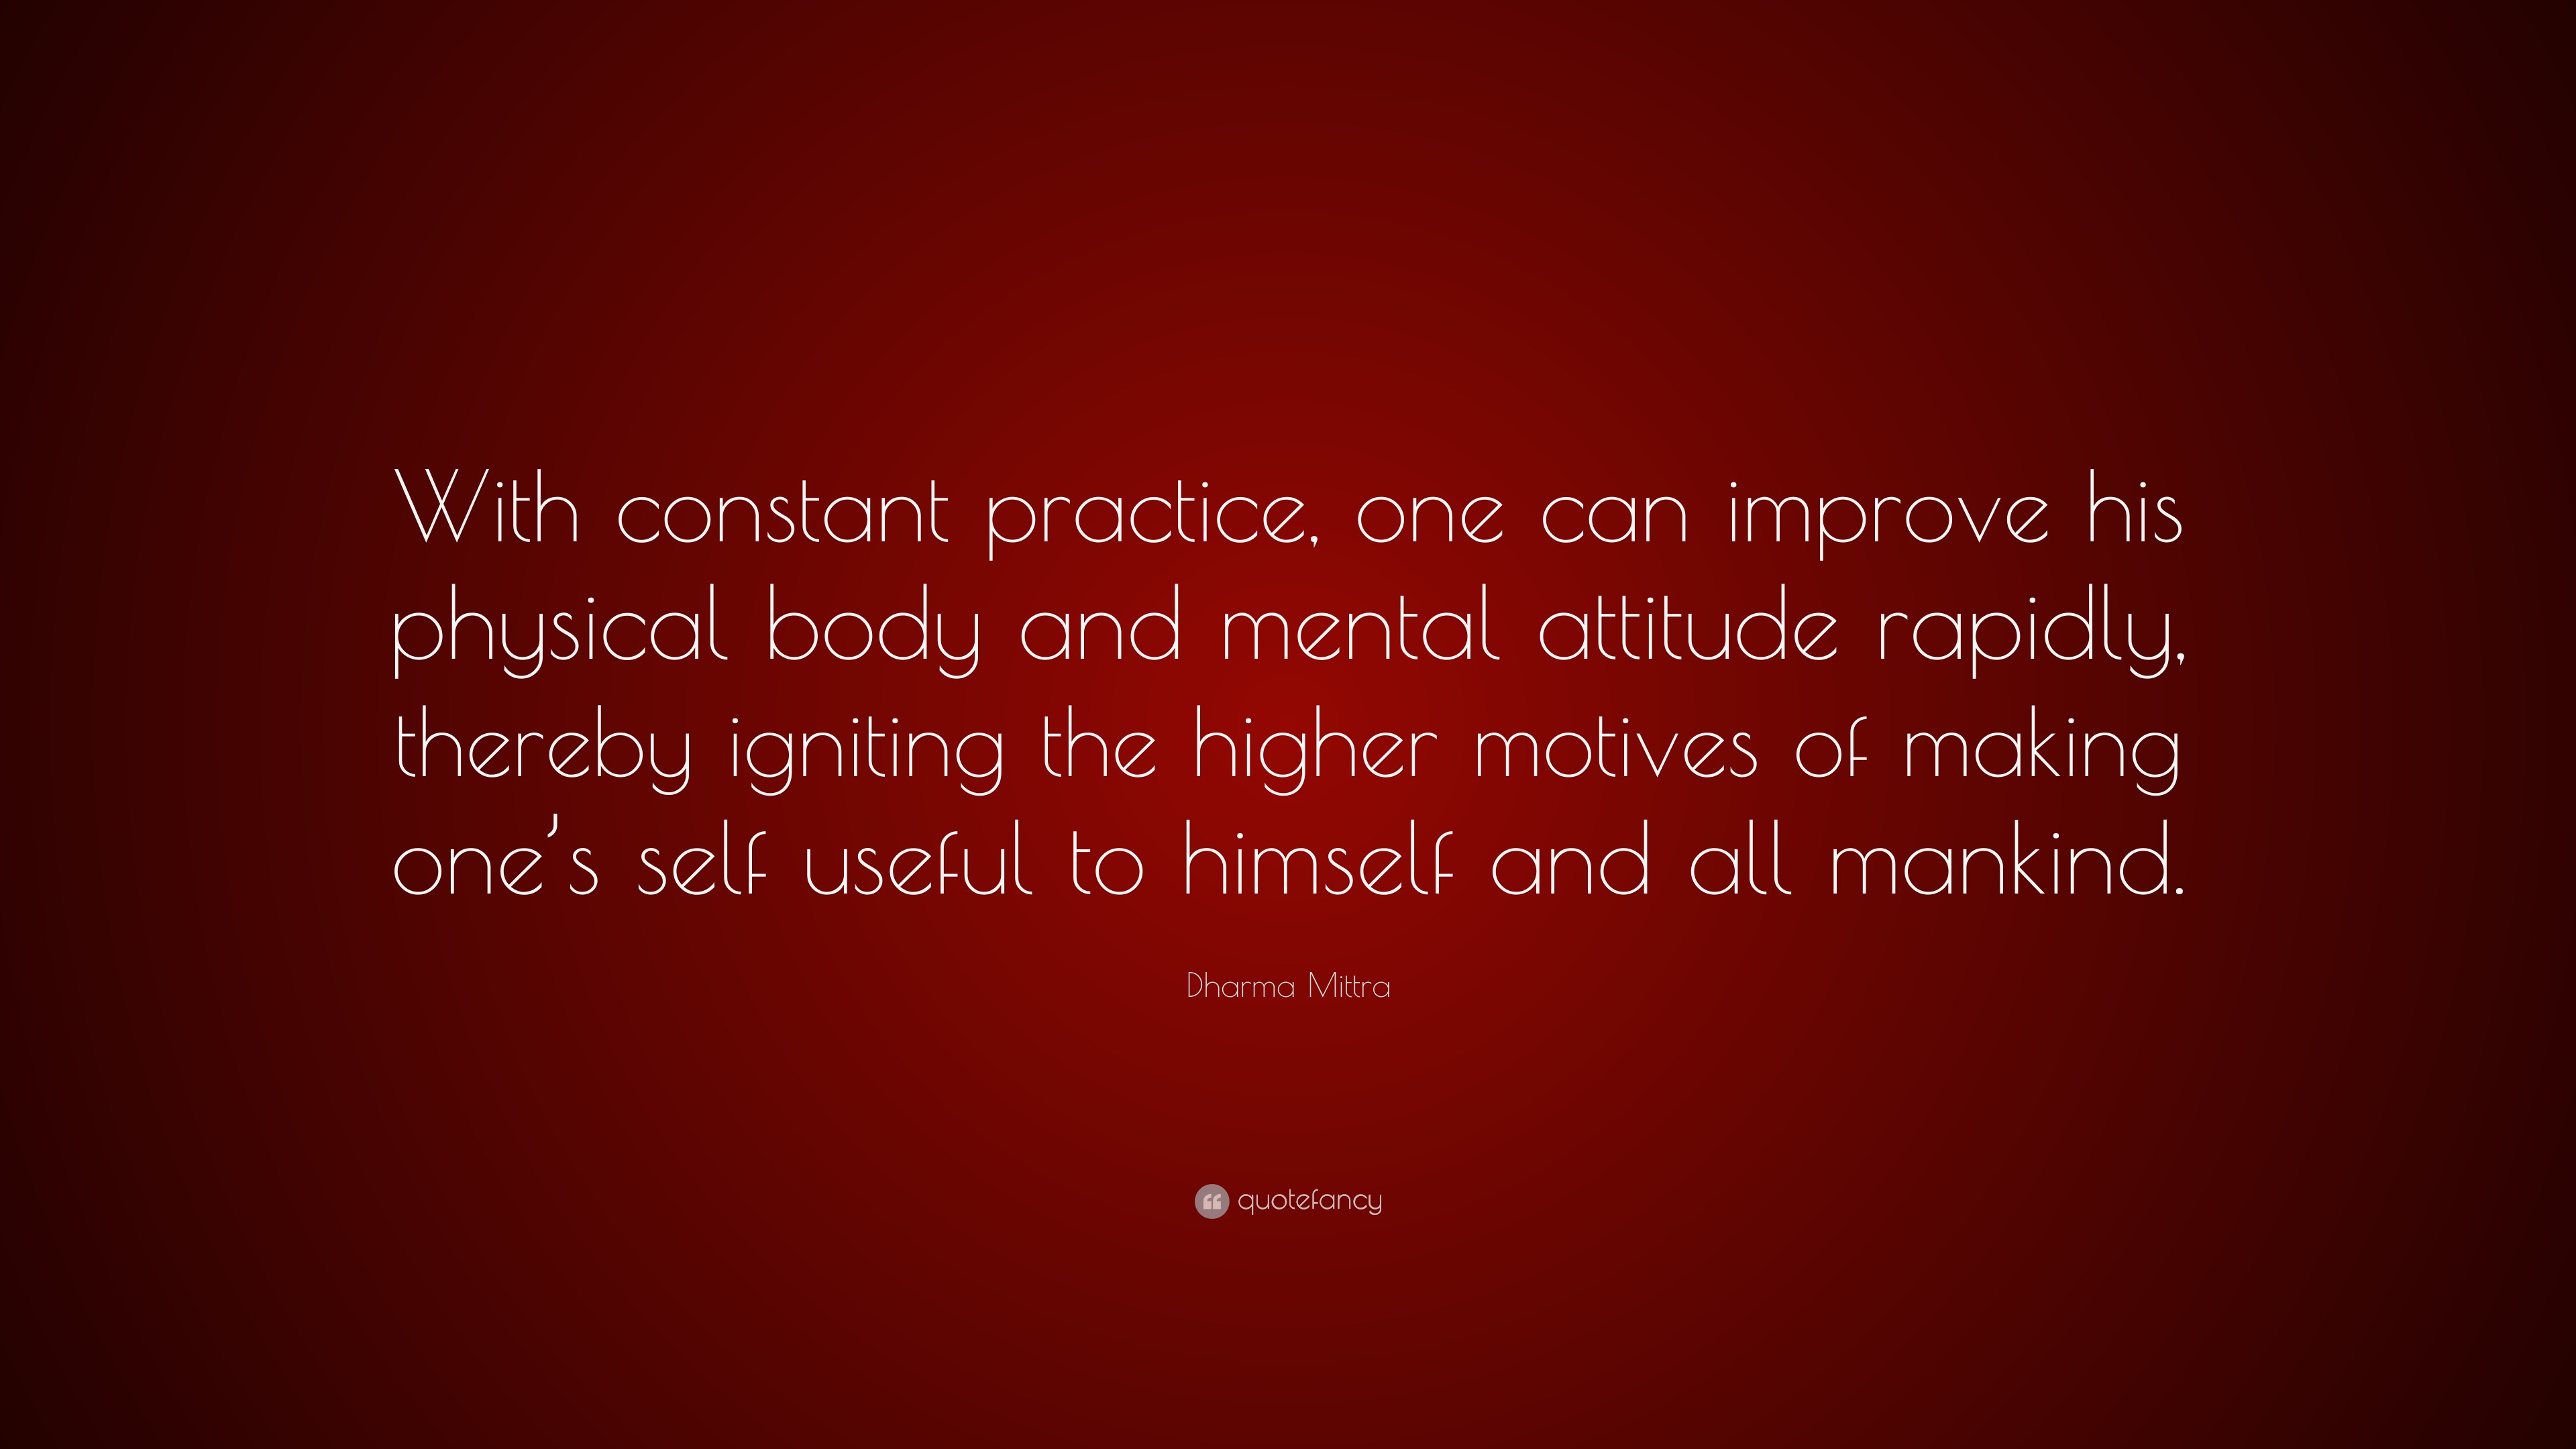 3157552 Dharma Mittra Quote With constant practice one can improve his